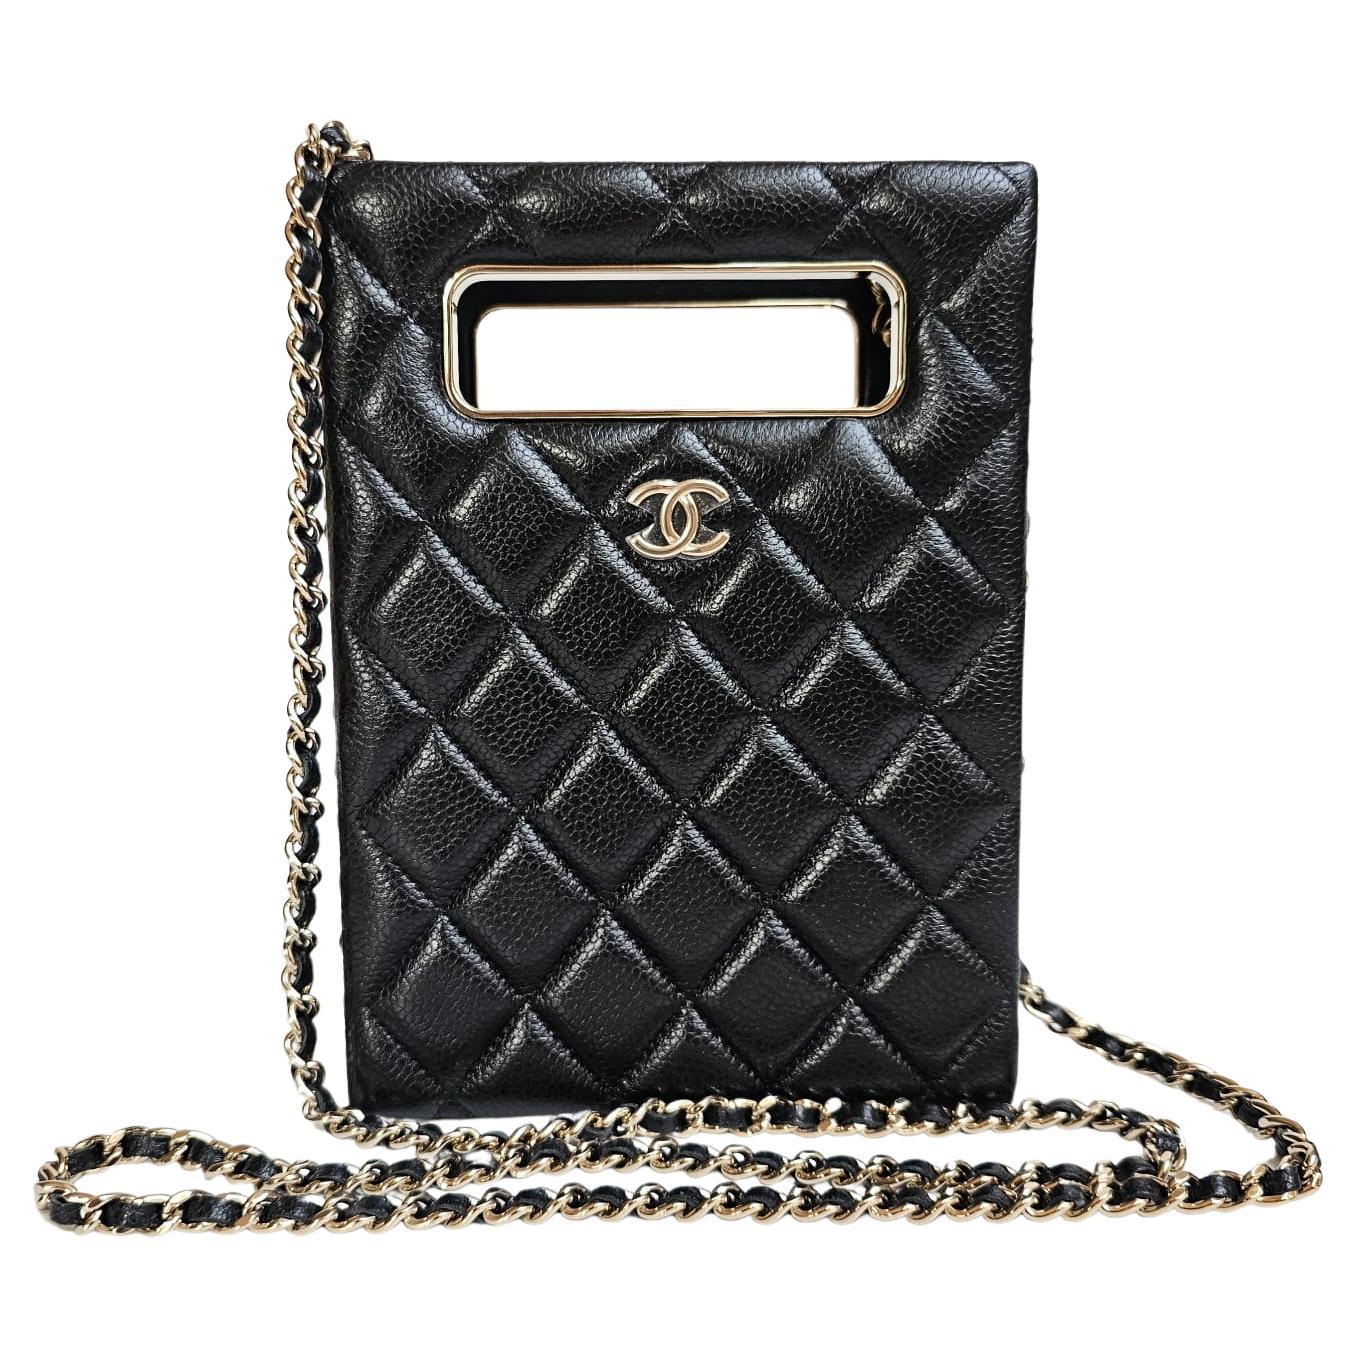 Chanel Black Caviar Quilted Evening Box Bag For Sale